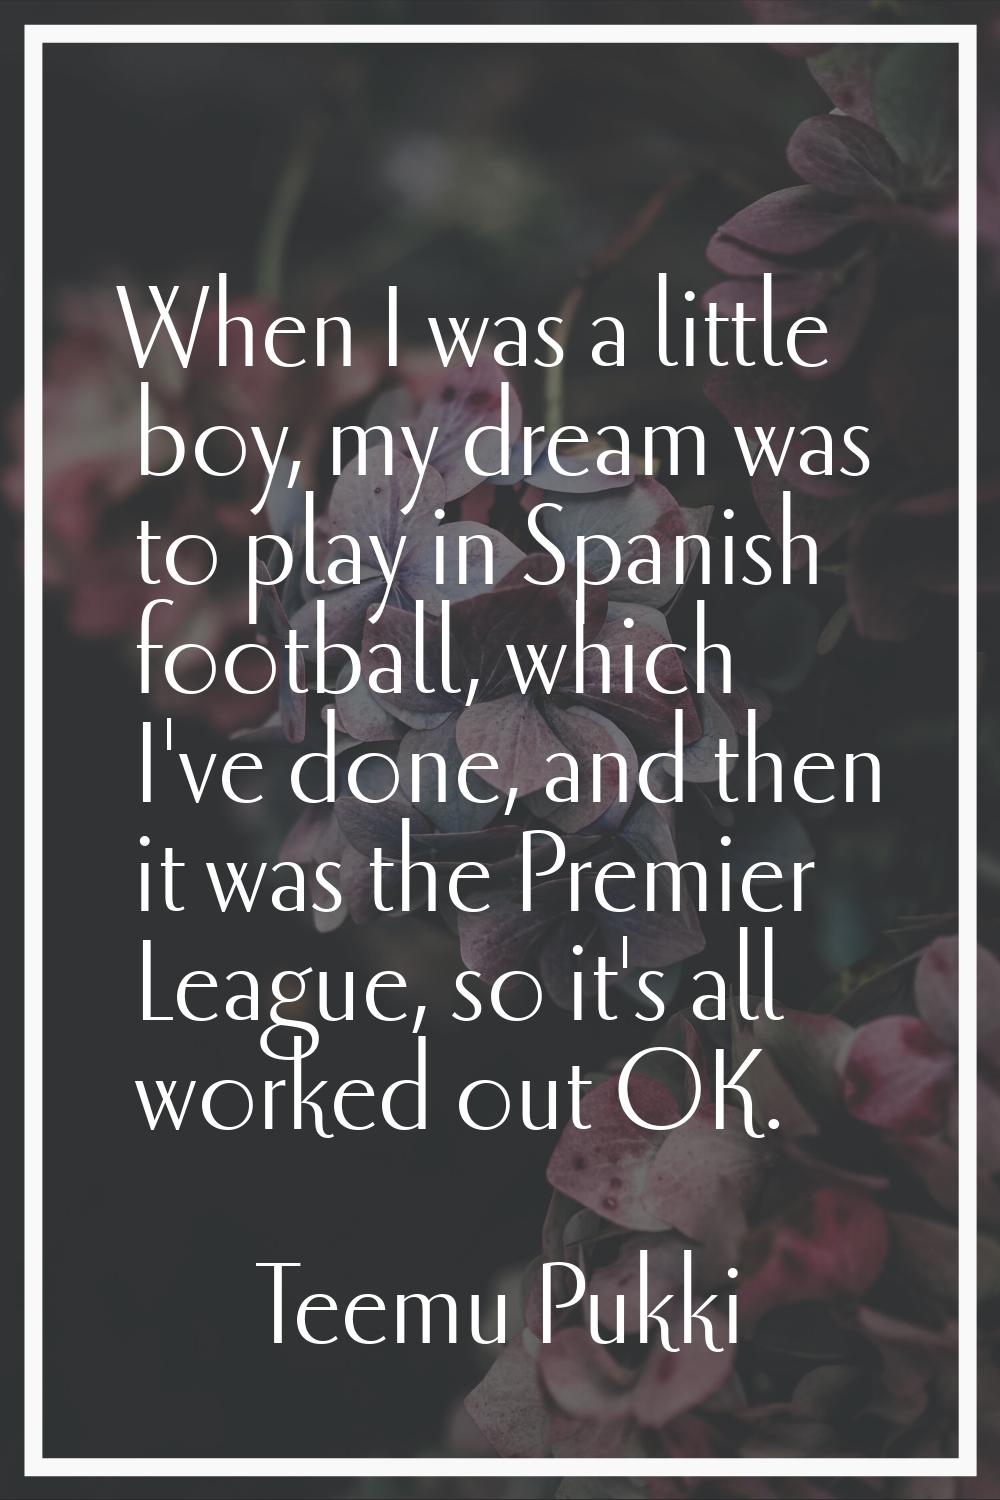 When I was a little boy, my dream was to play in Spanish football, which I've done, and then it was